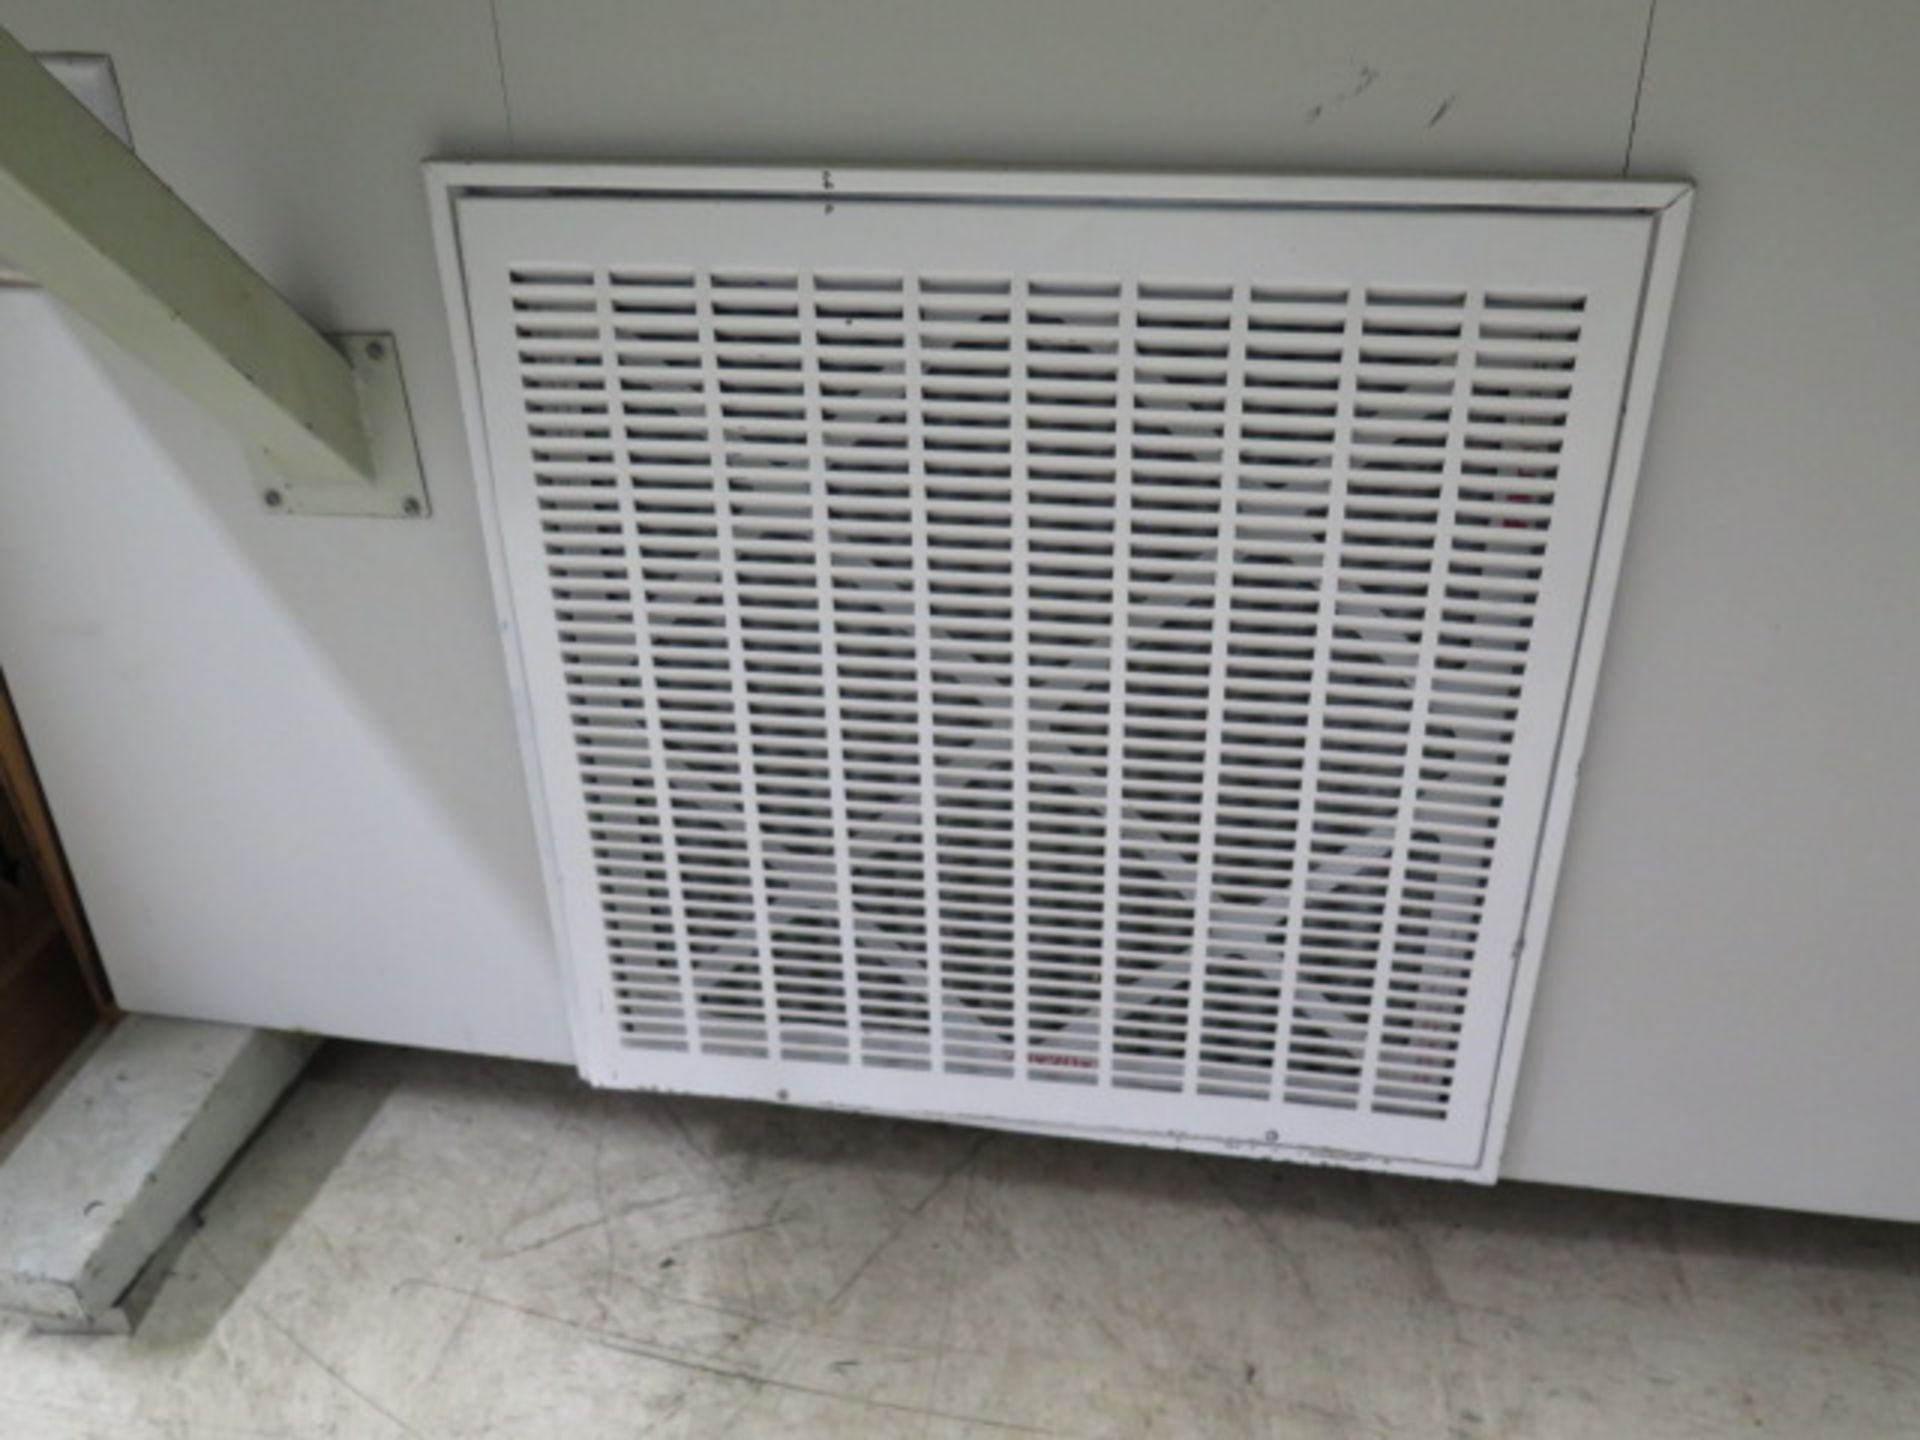 Airtech Fume Ventilation Hood (SOLD AS-IS - NO WARRANTY) (Located @ 2229 Ringwood Ave. San Jose) - Image 5 of 6